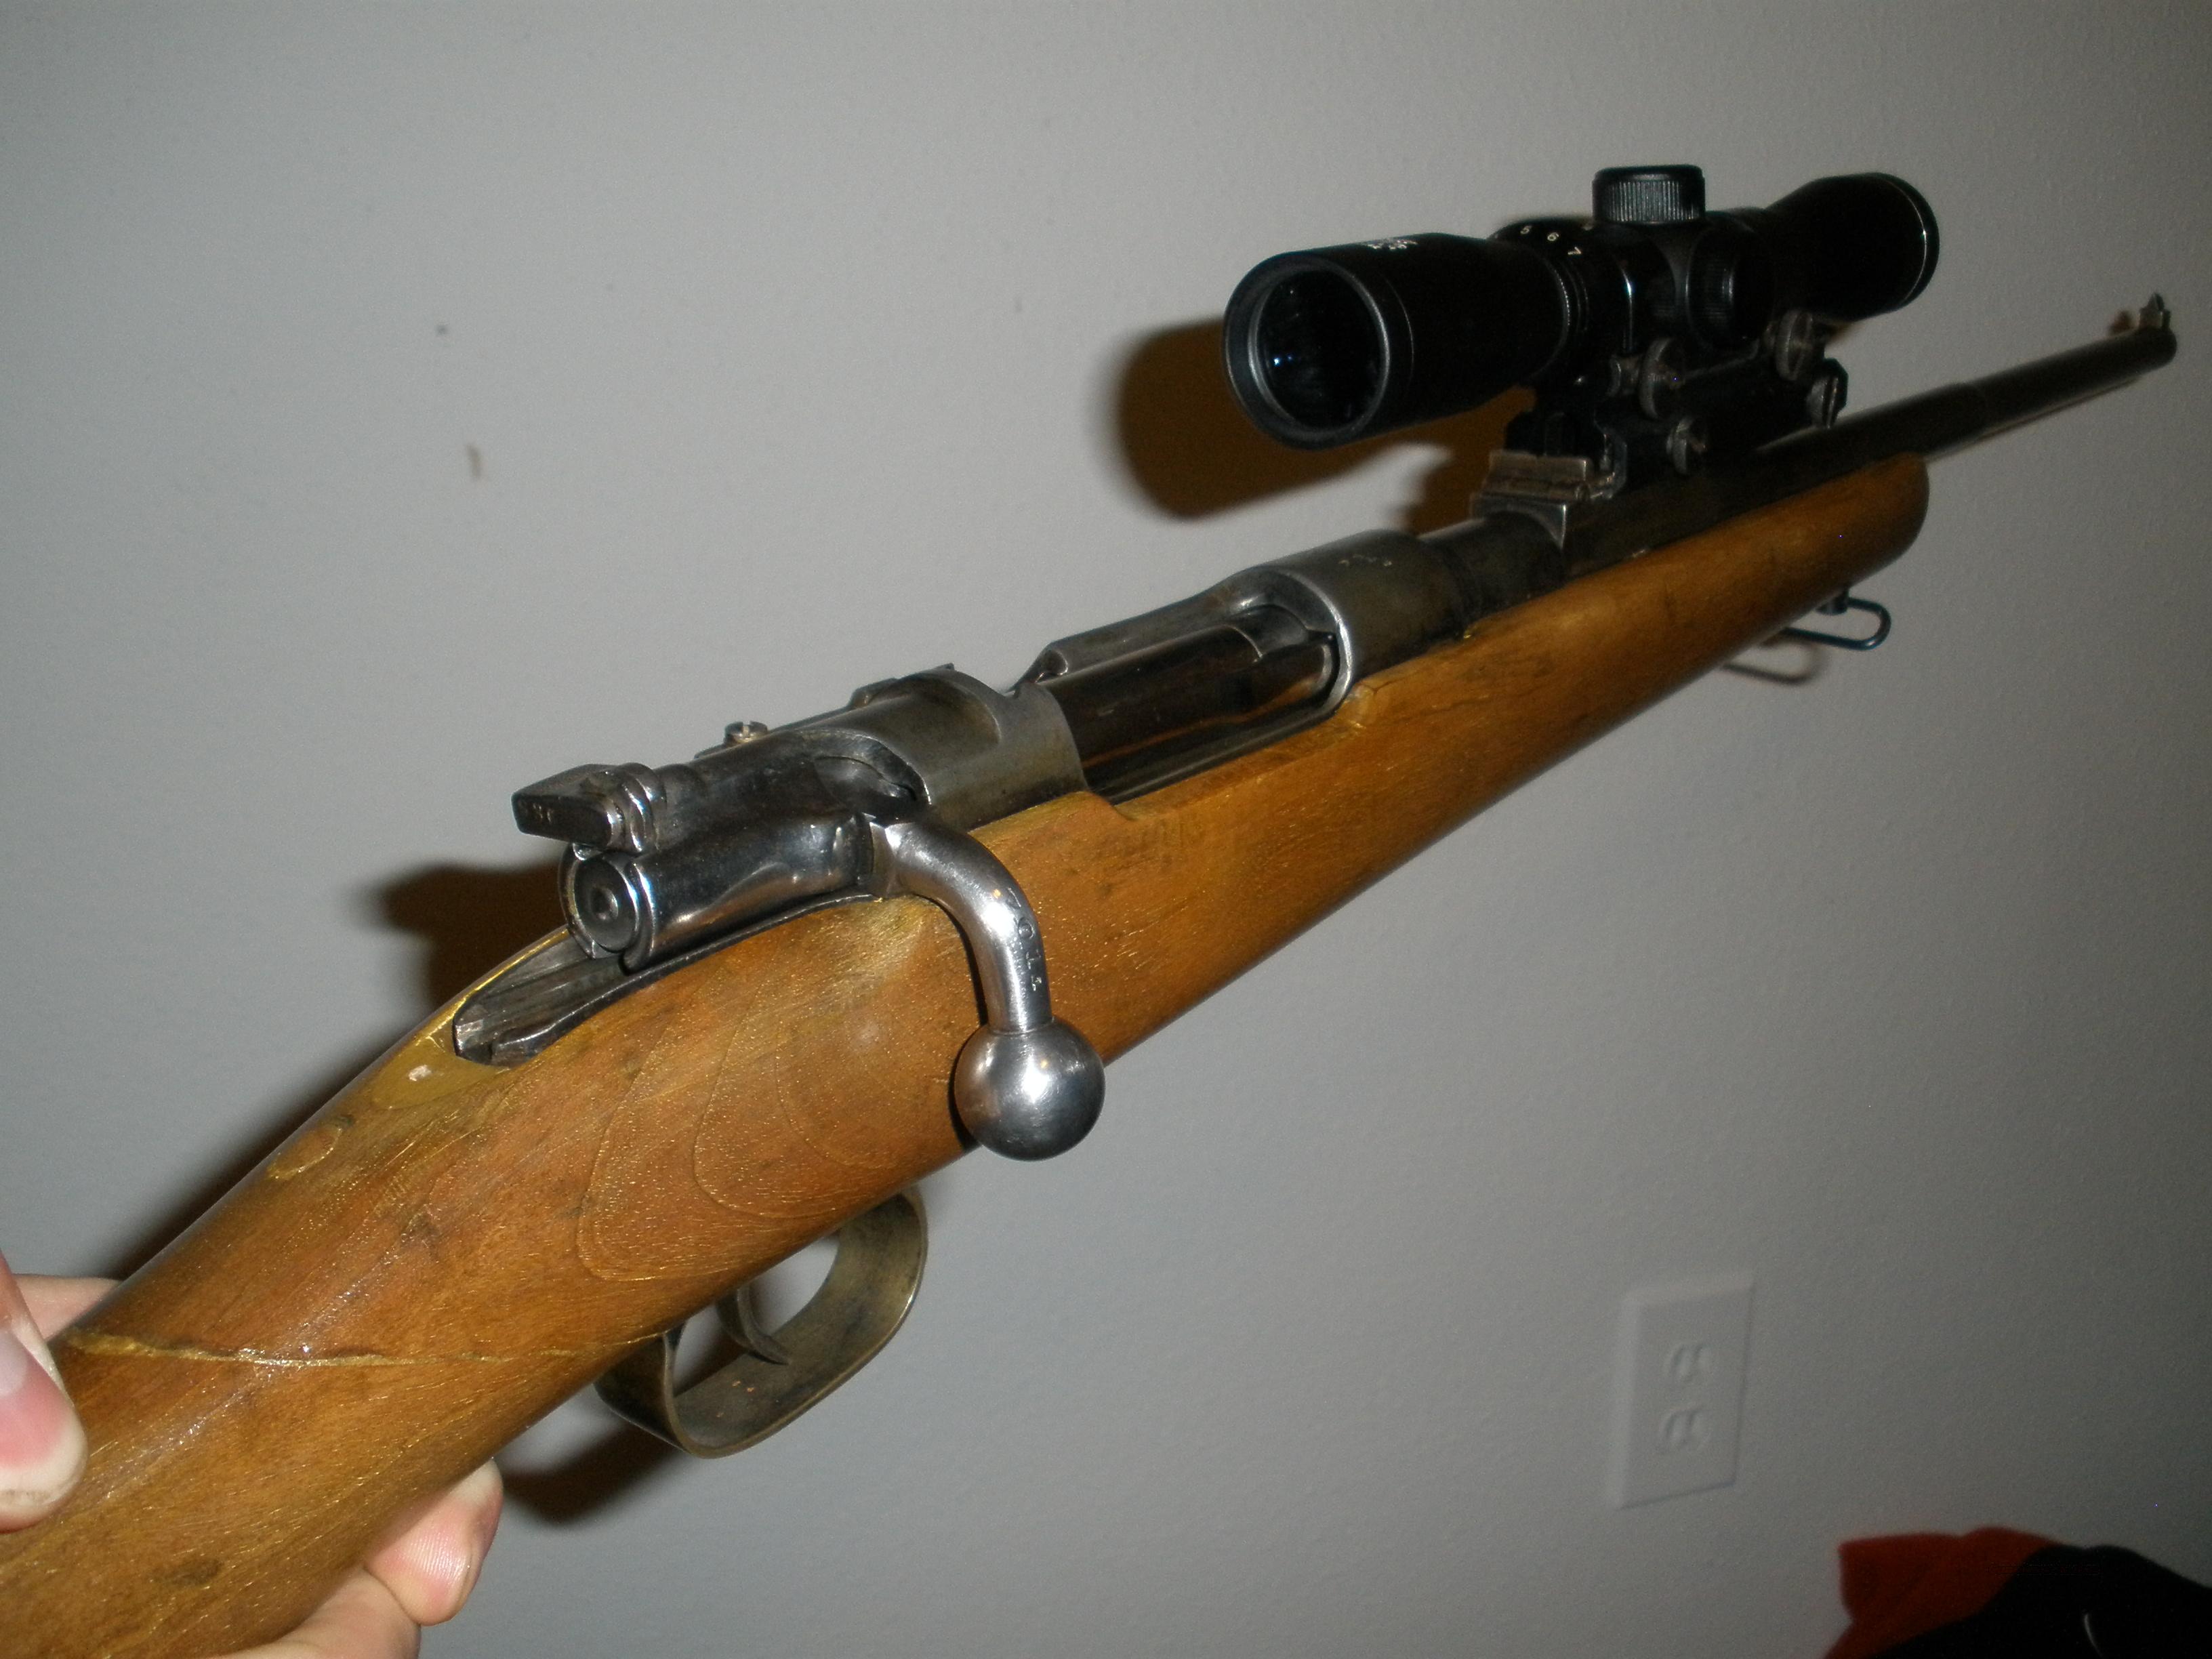 7mm german mauser rifle for sale - jawerframe